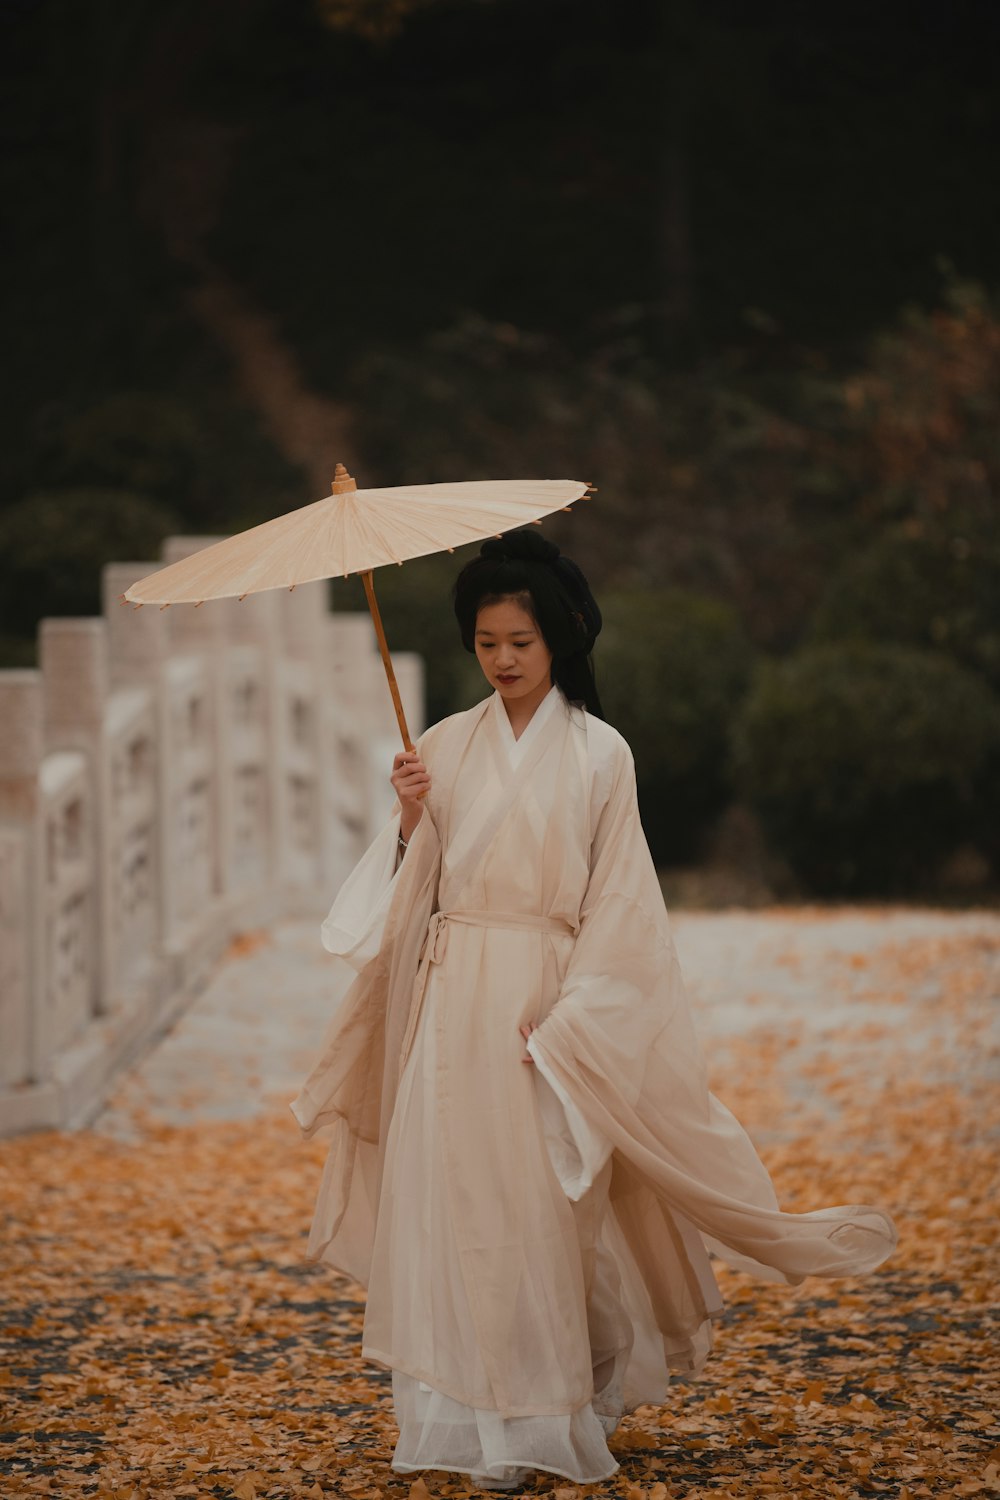 a person in a white dress holding an umbrella